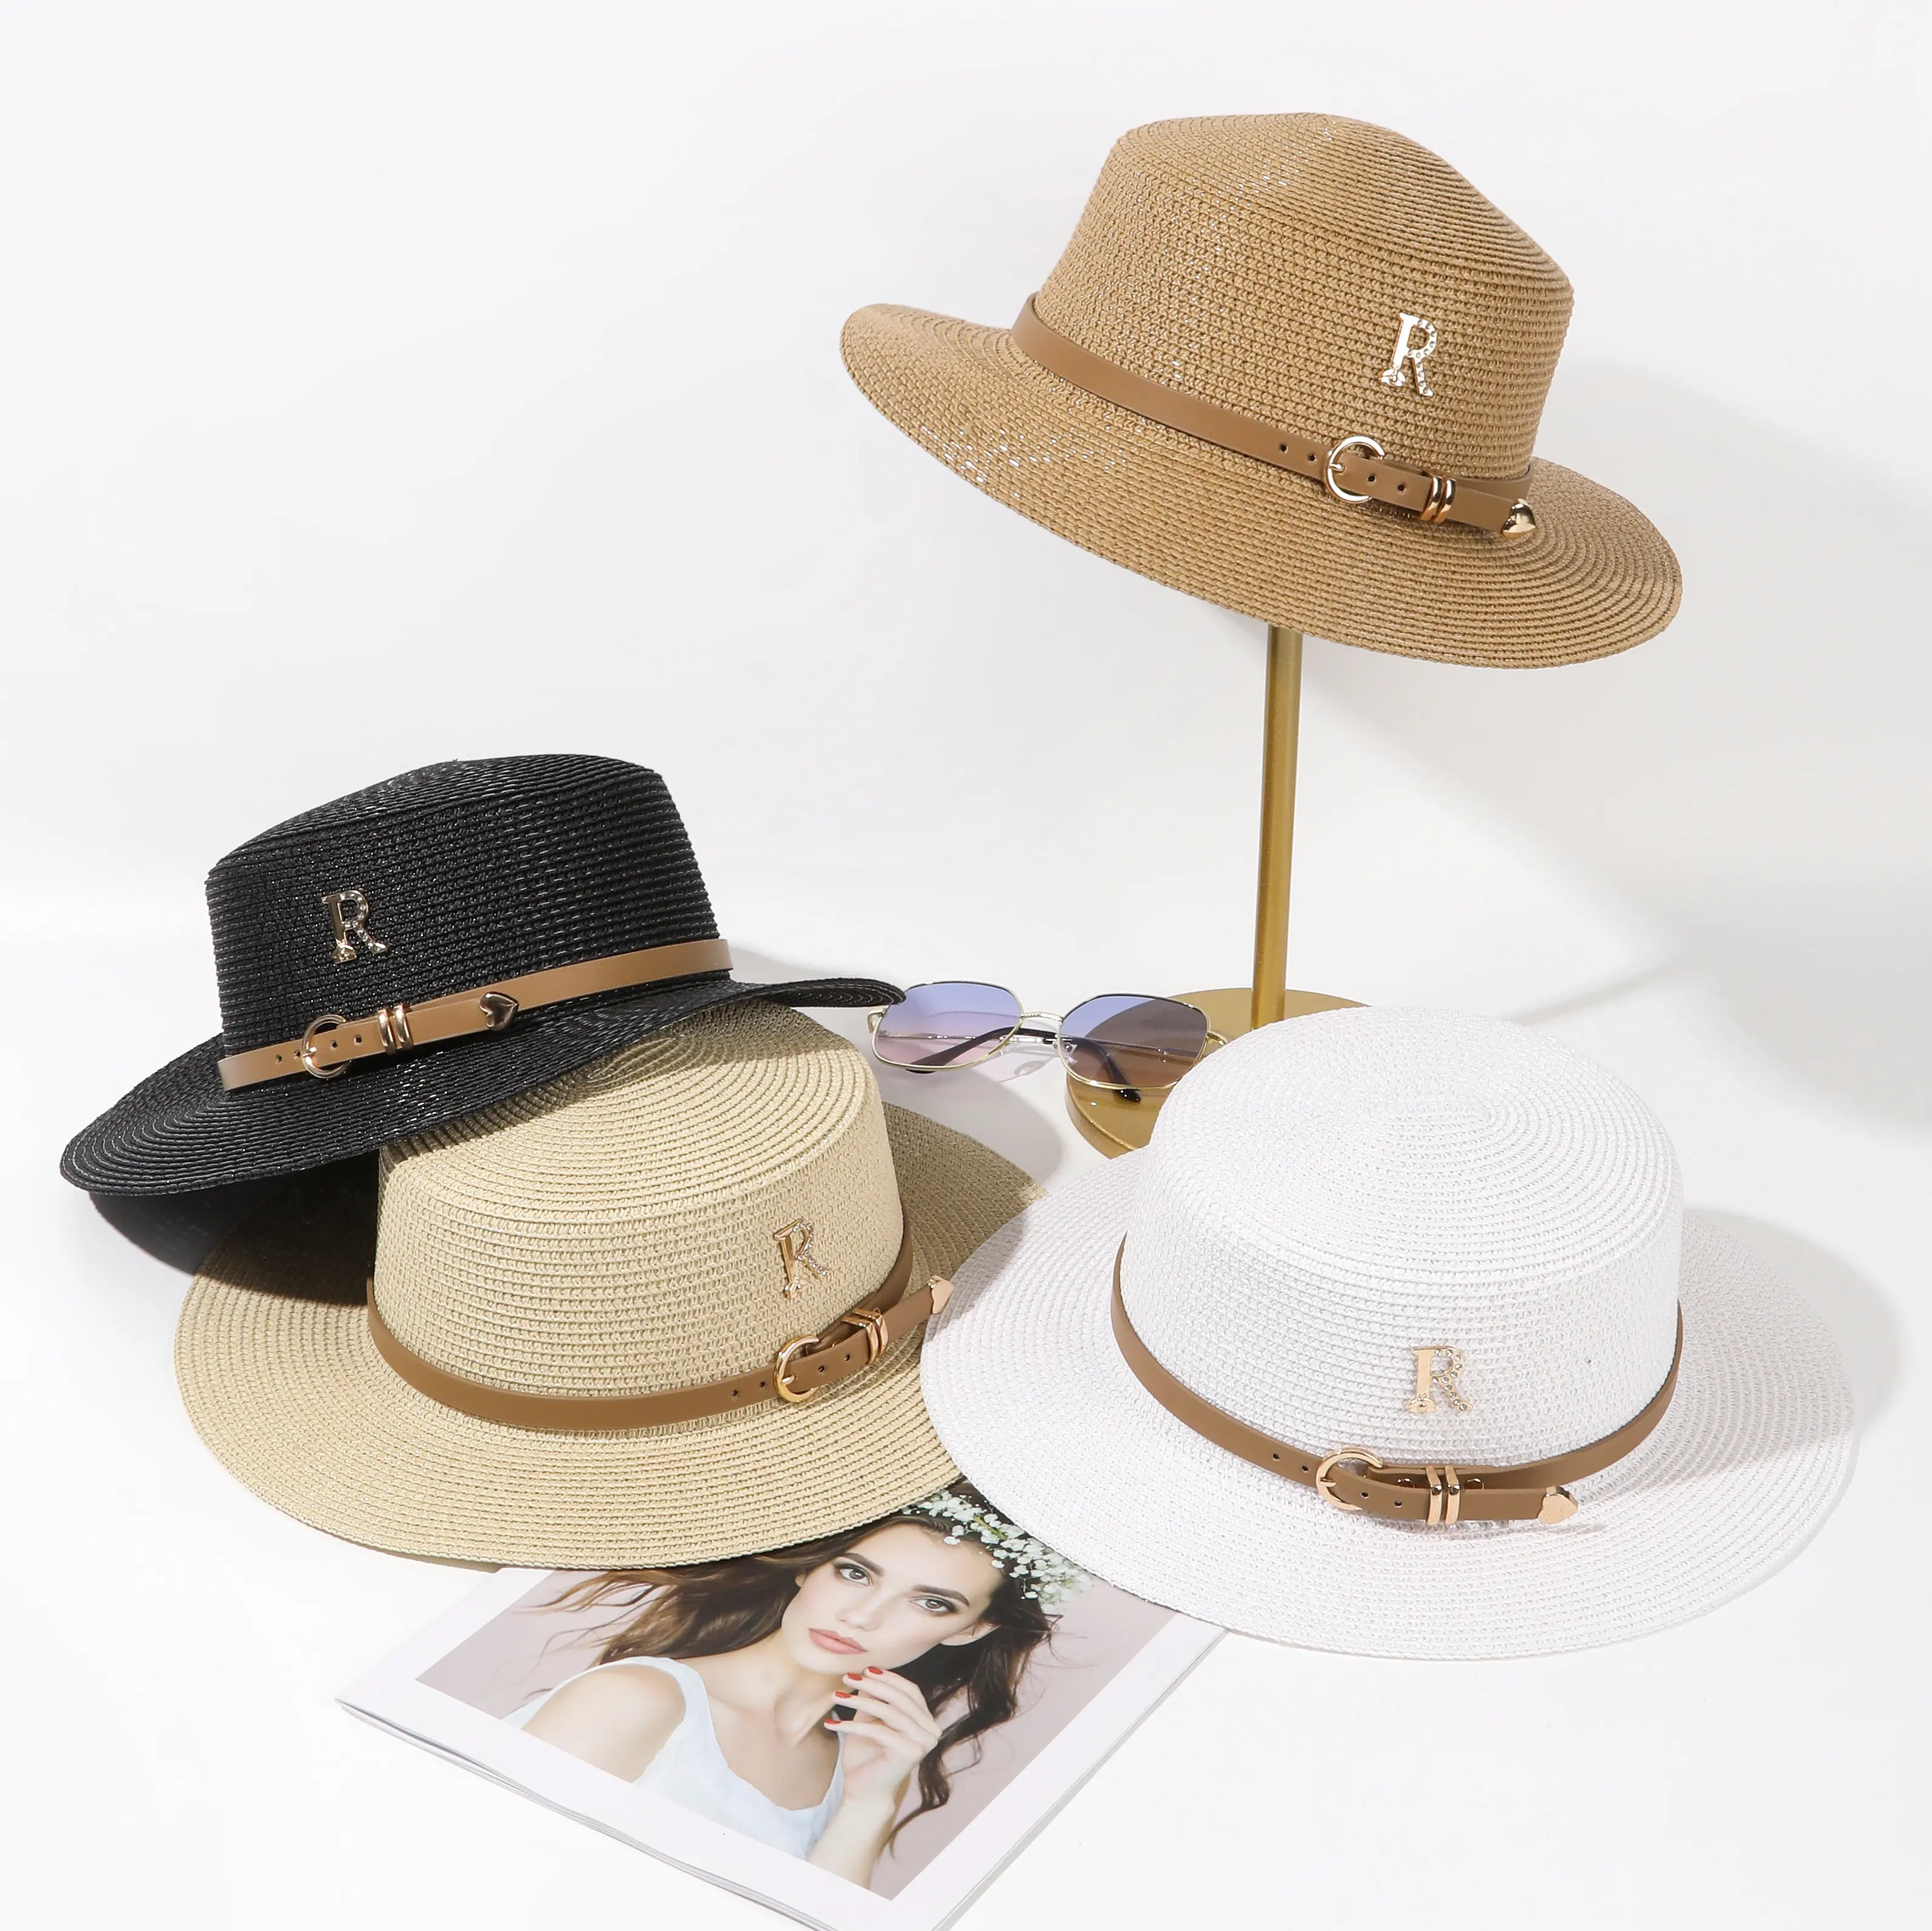 Wholesale Fashion Luxury Summer Straw Hat 50 box Outdoor Beach Sunshade Flat Top Woman Straw A Hat With Paper Straw Hats